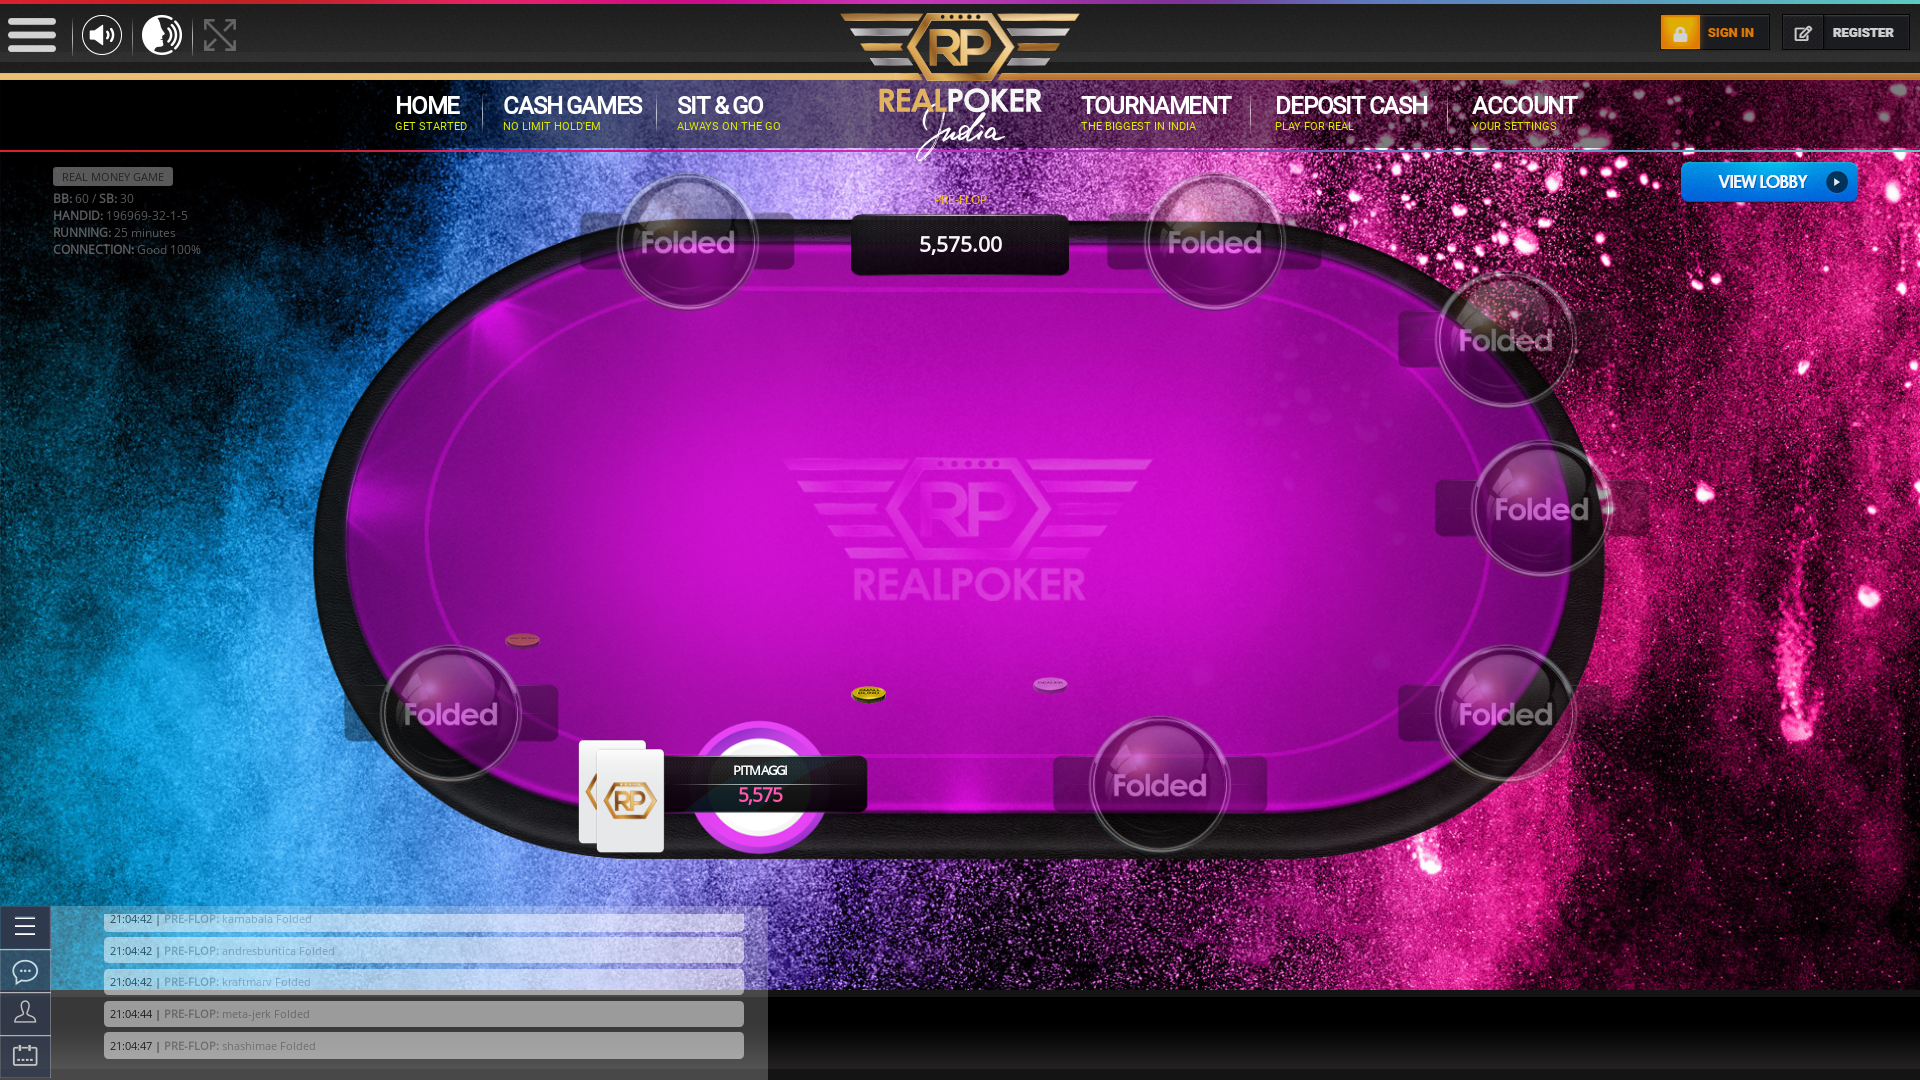 Online poker on a 10 player table in the 24th minute match up